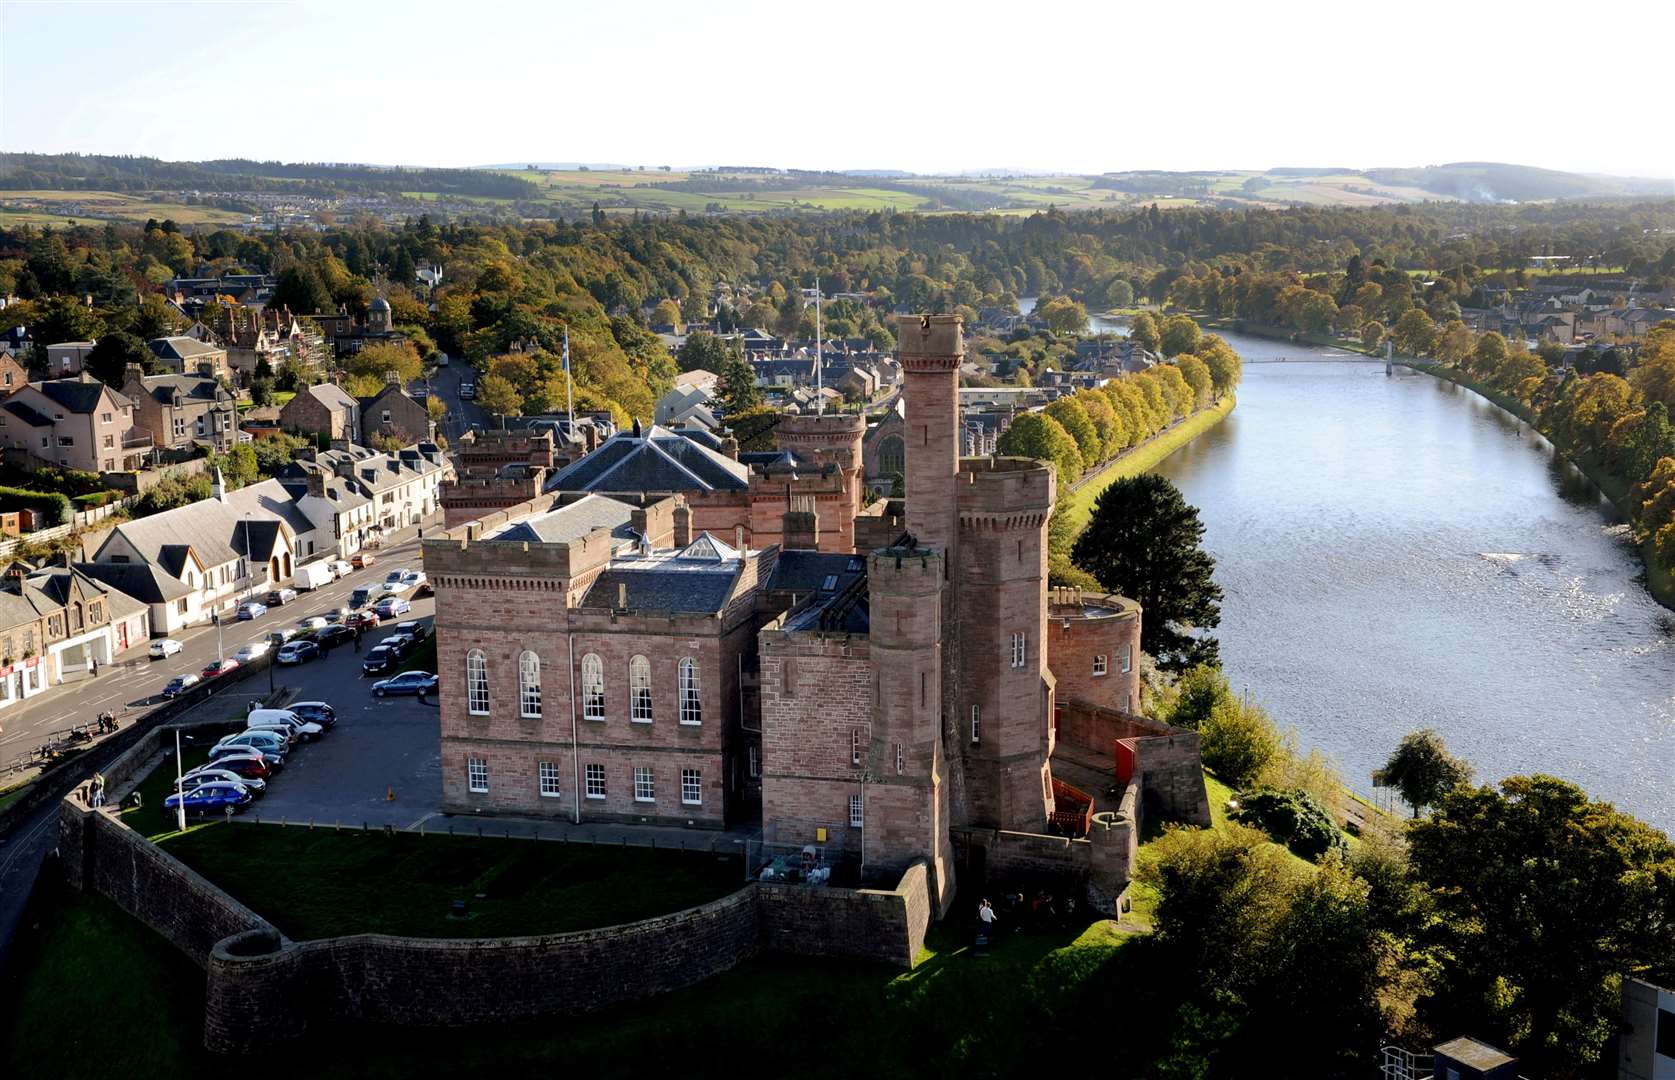 Plans are progressing to turn Inverness Castle into a new tourist attraction.